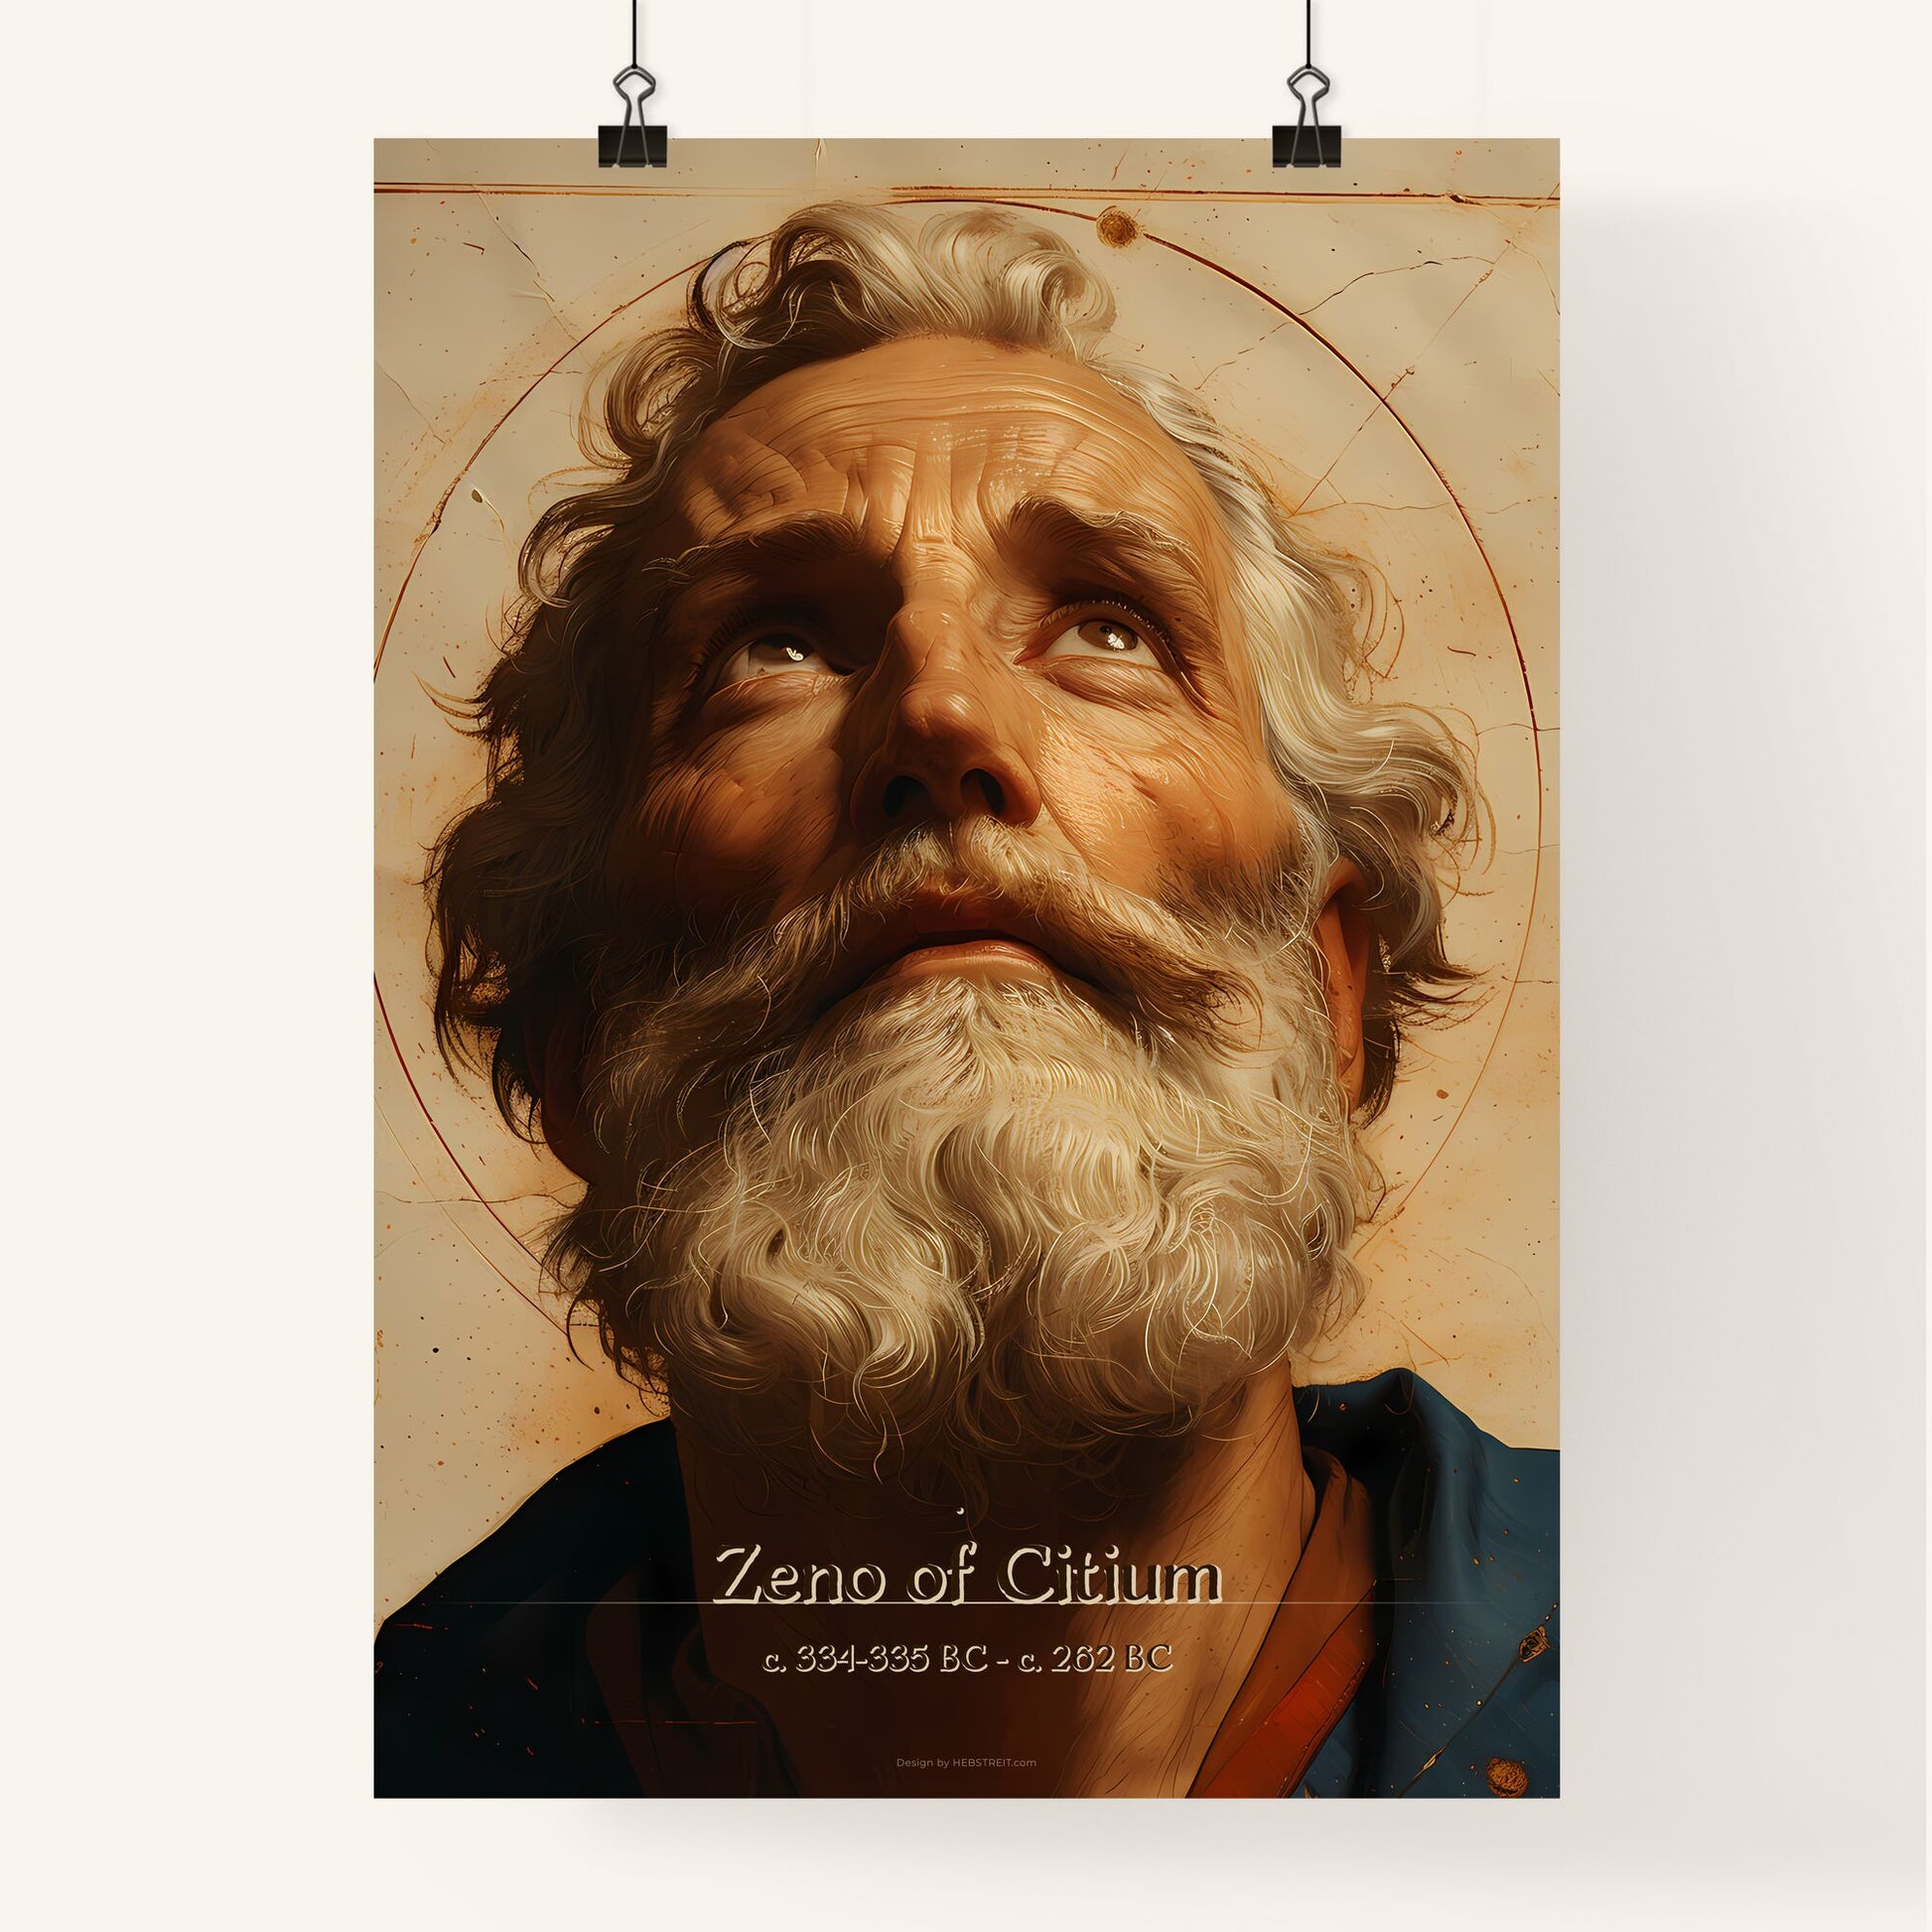 Zeno of Citium, c. 334-335 BC - c. 262 BC, A Poster of a painting of a man looking up Default Title